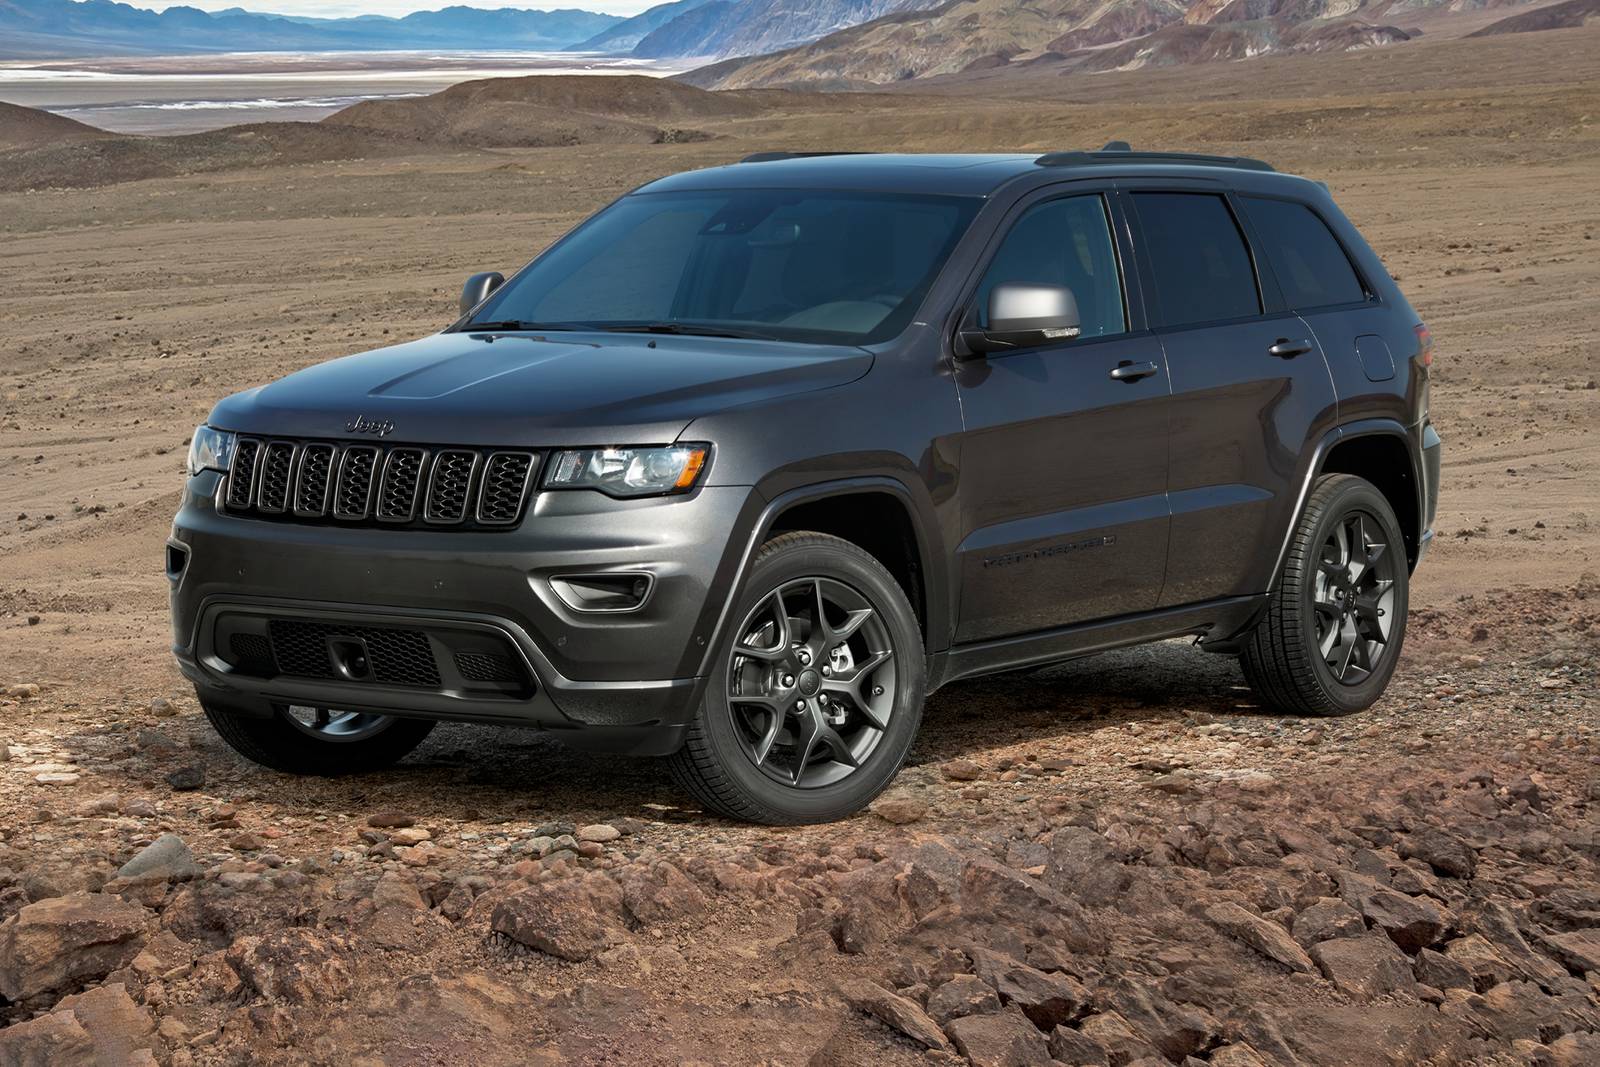 Which Can Tow More? Jeep Cherokee, Grand Cherokee or Wrangler?